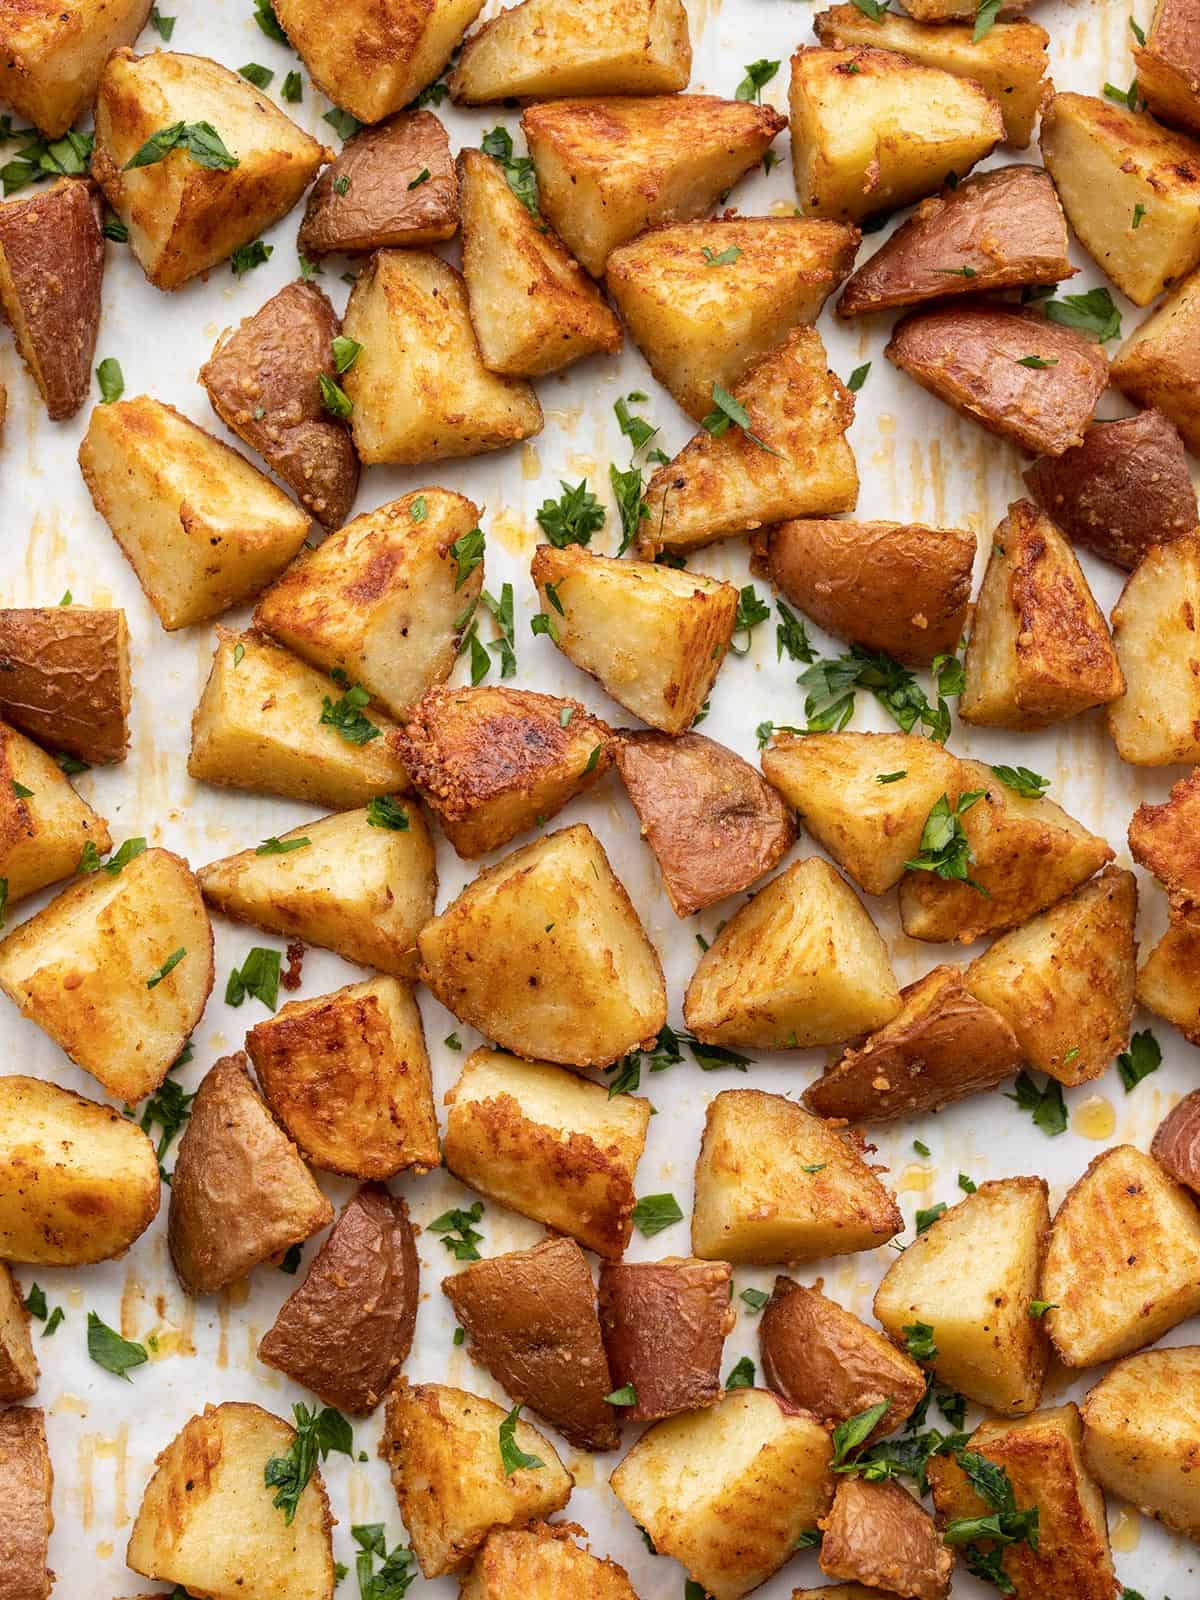 Parmesan roasted potatoes on a baking sheet garnished with parsley